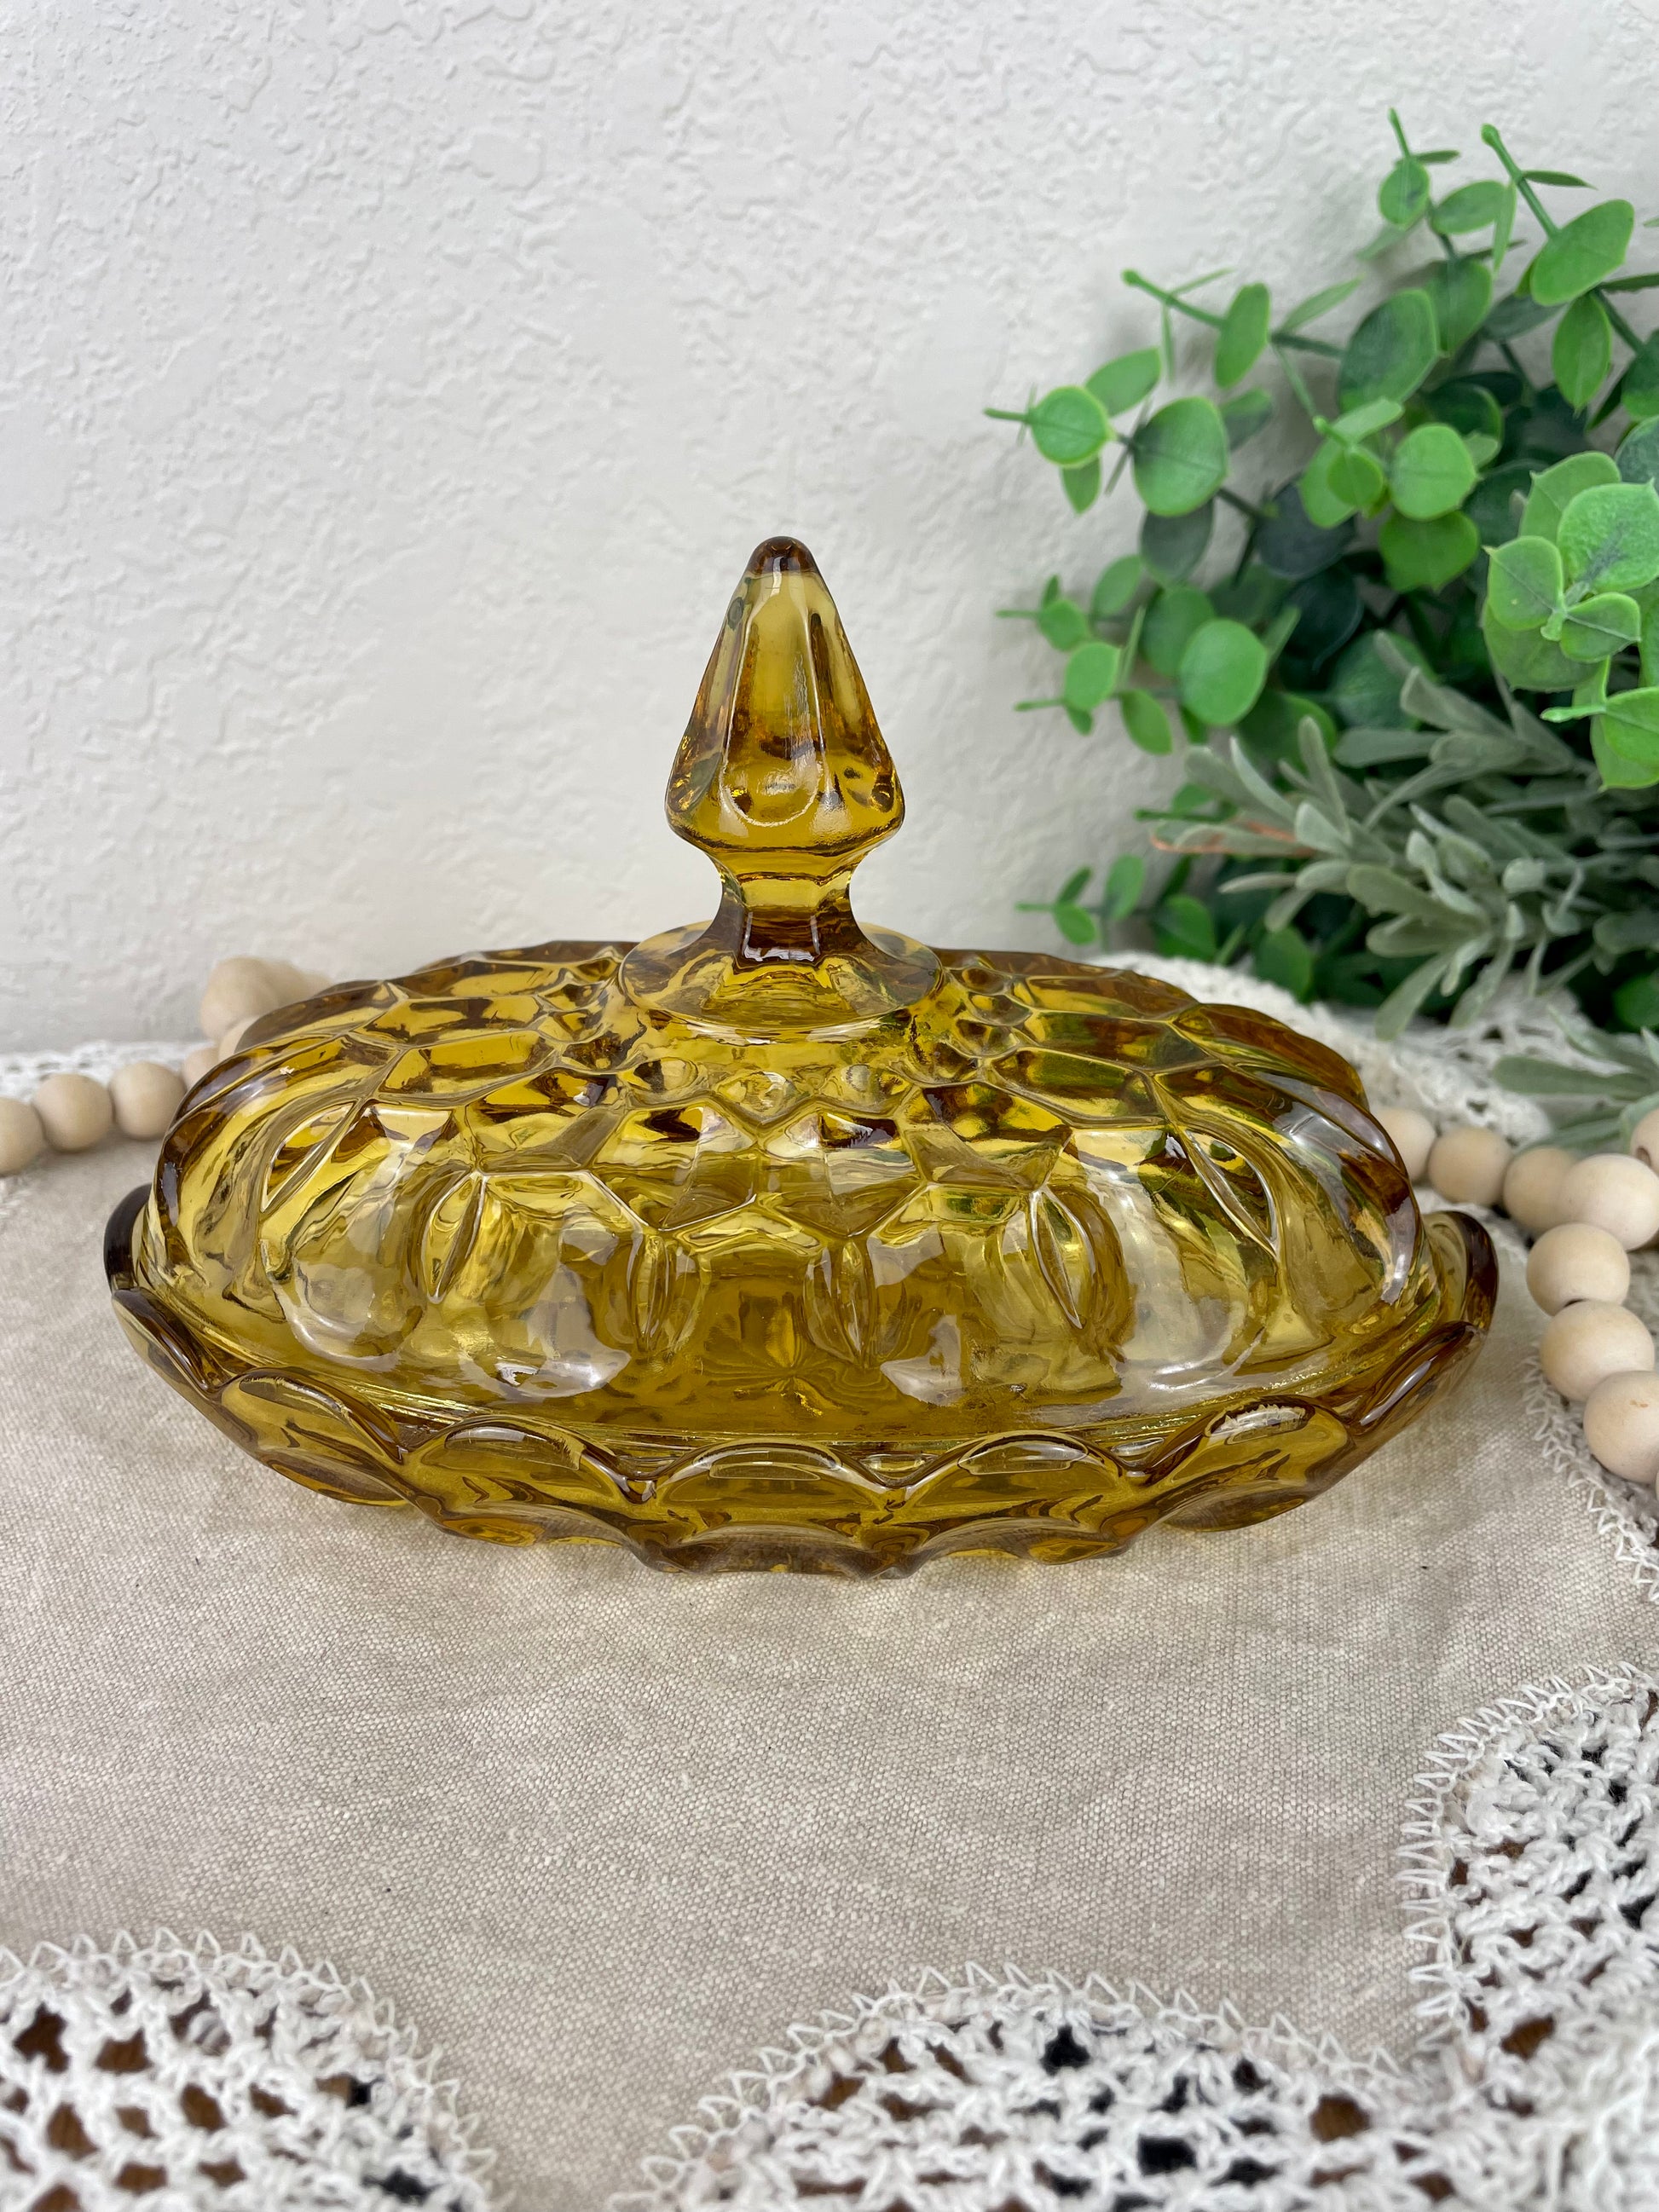 Vintage Amber Glass Casserole Dish With Yellow Flowers 